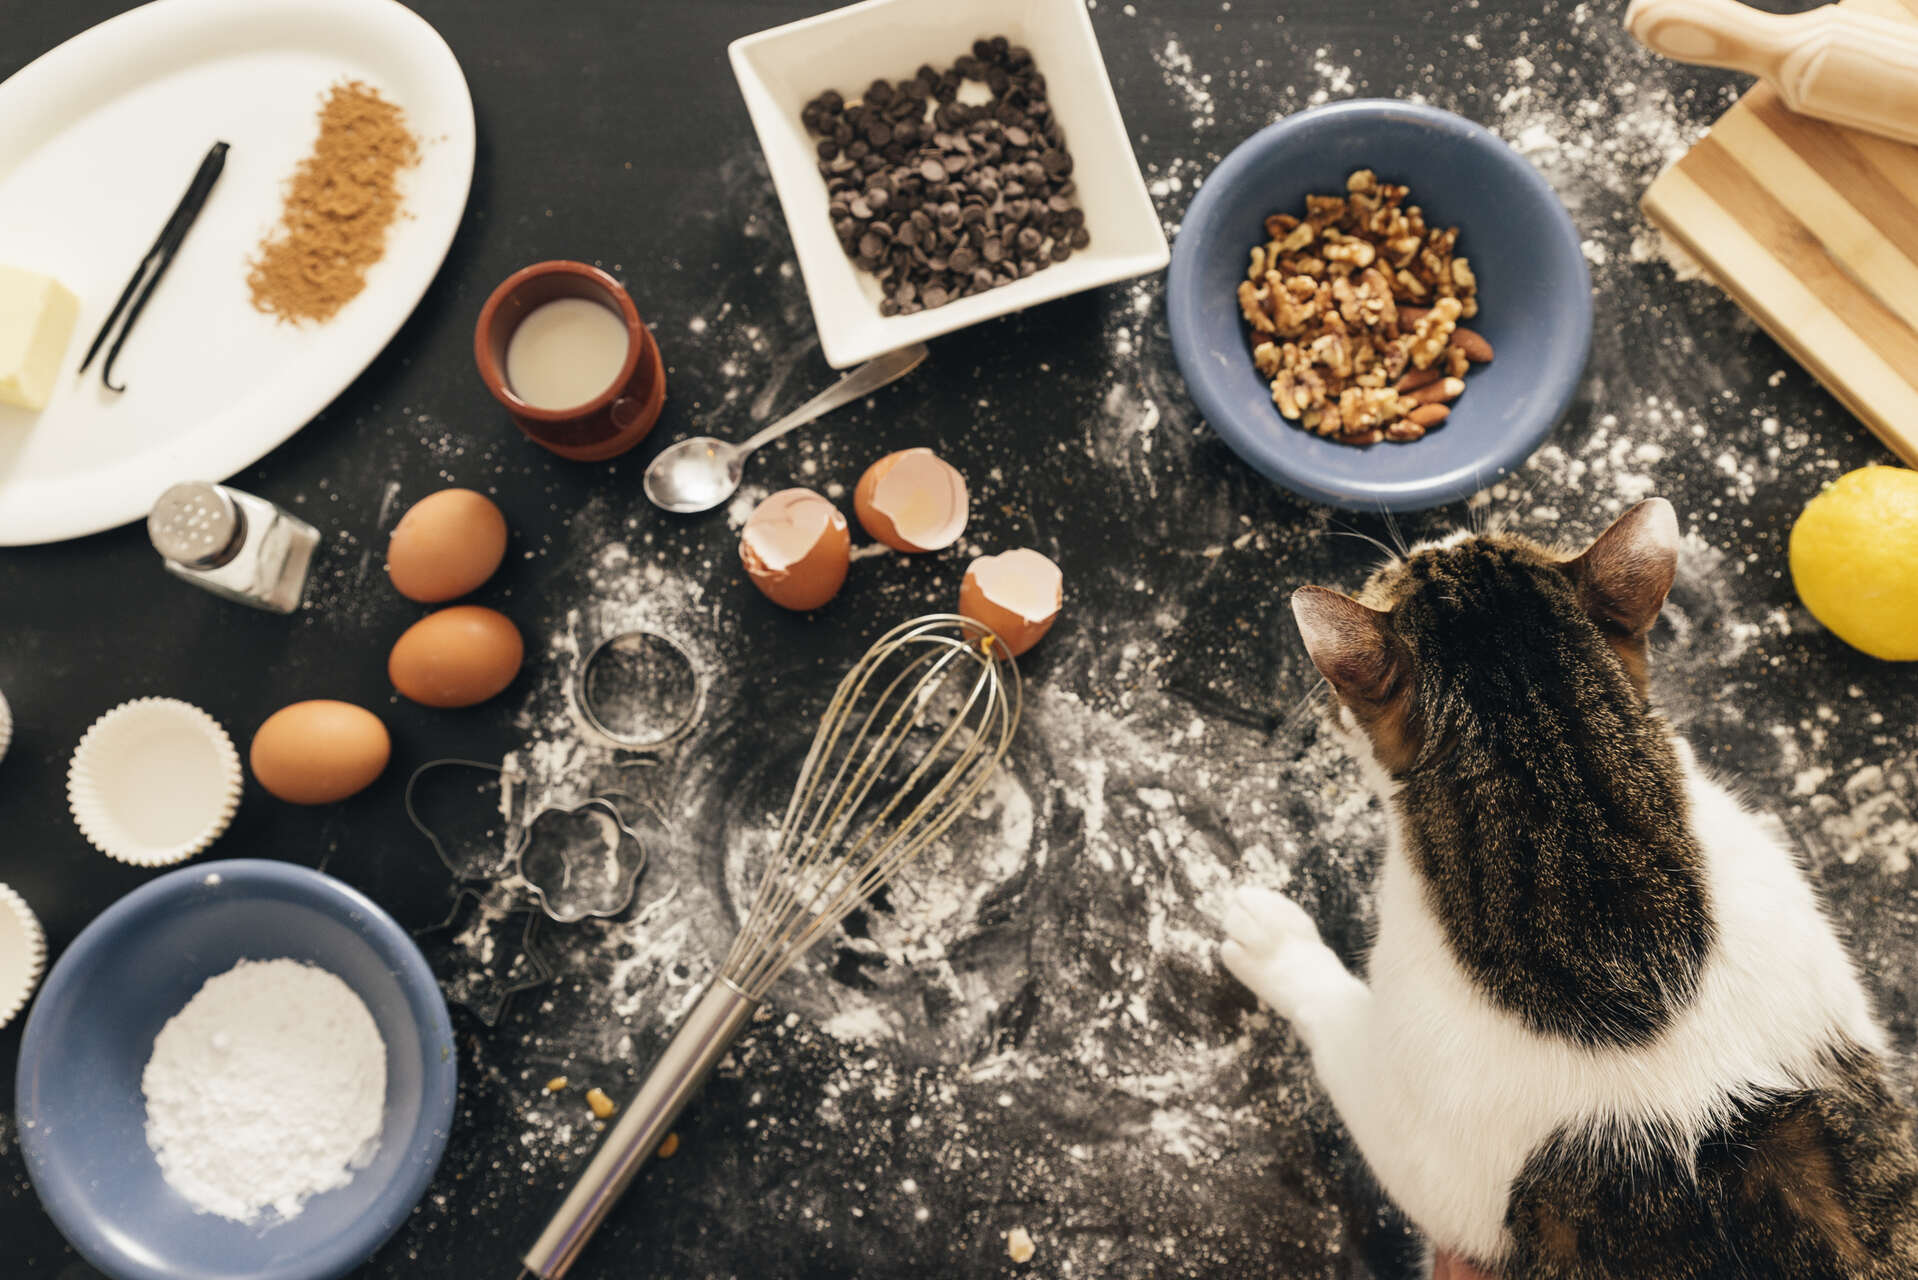 A cat sitting over a messy kitchen table filled with baking ingredients